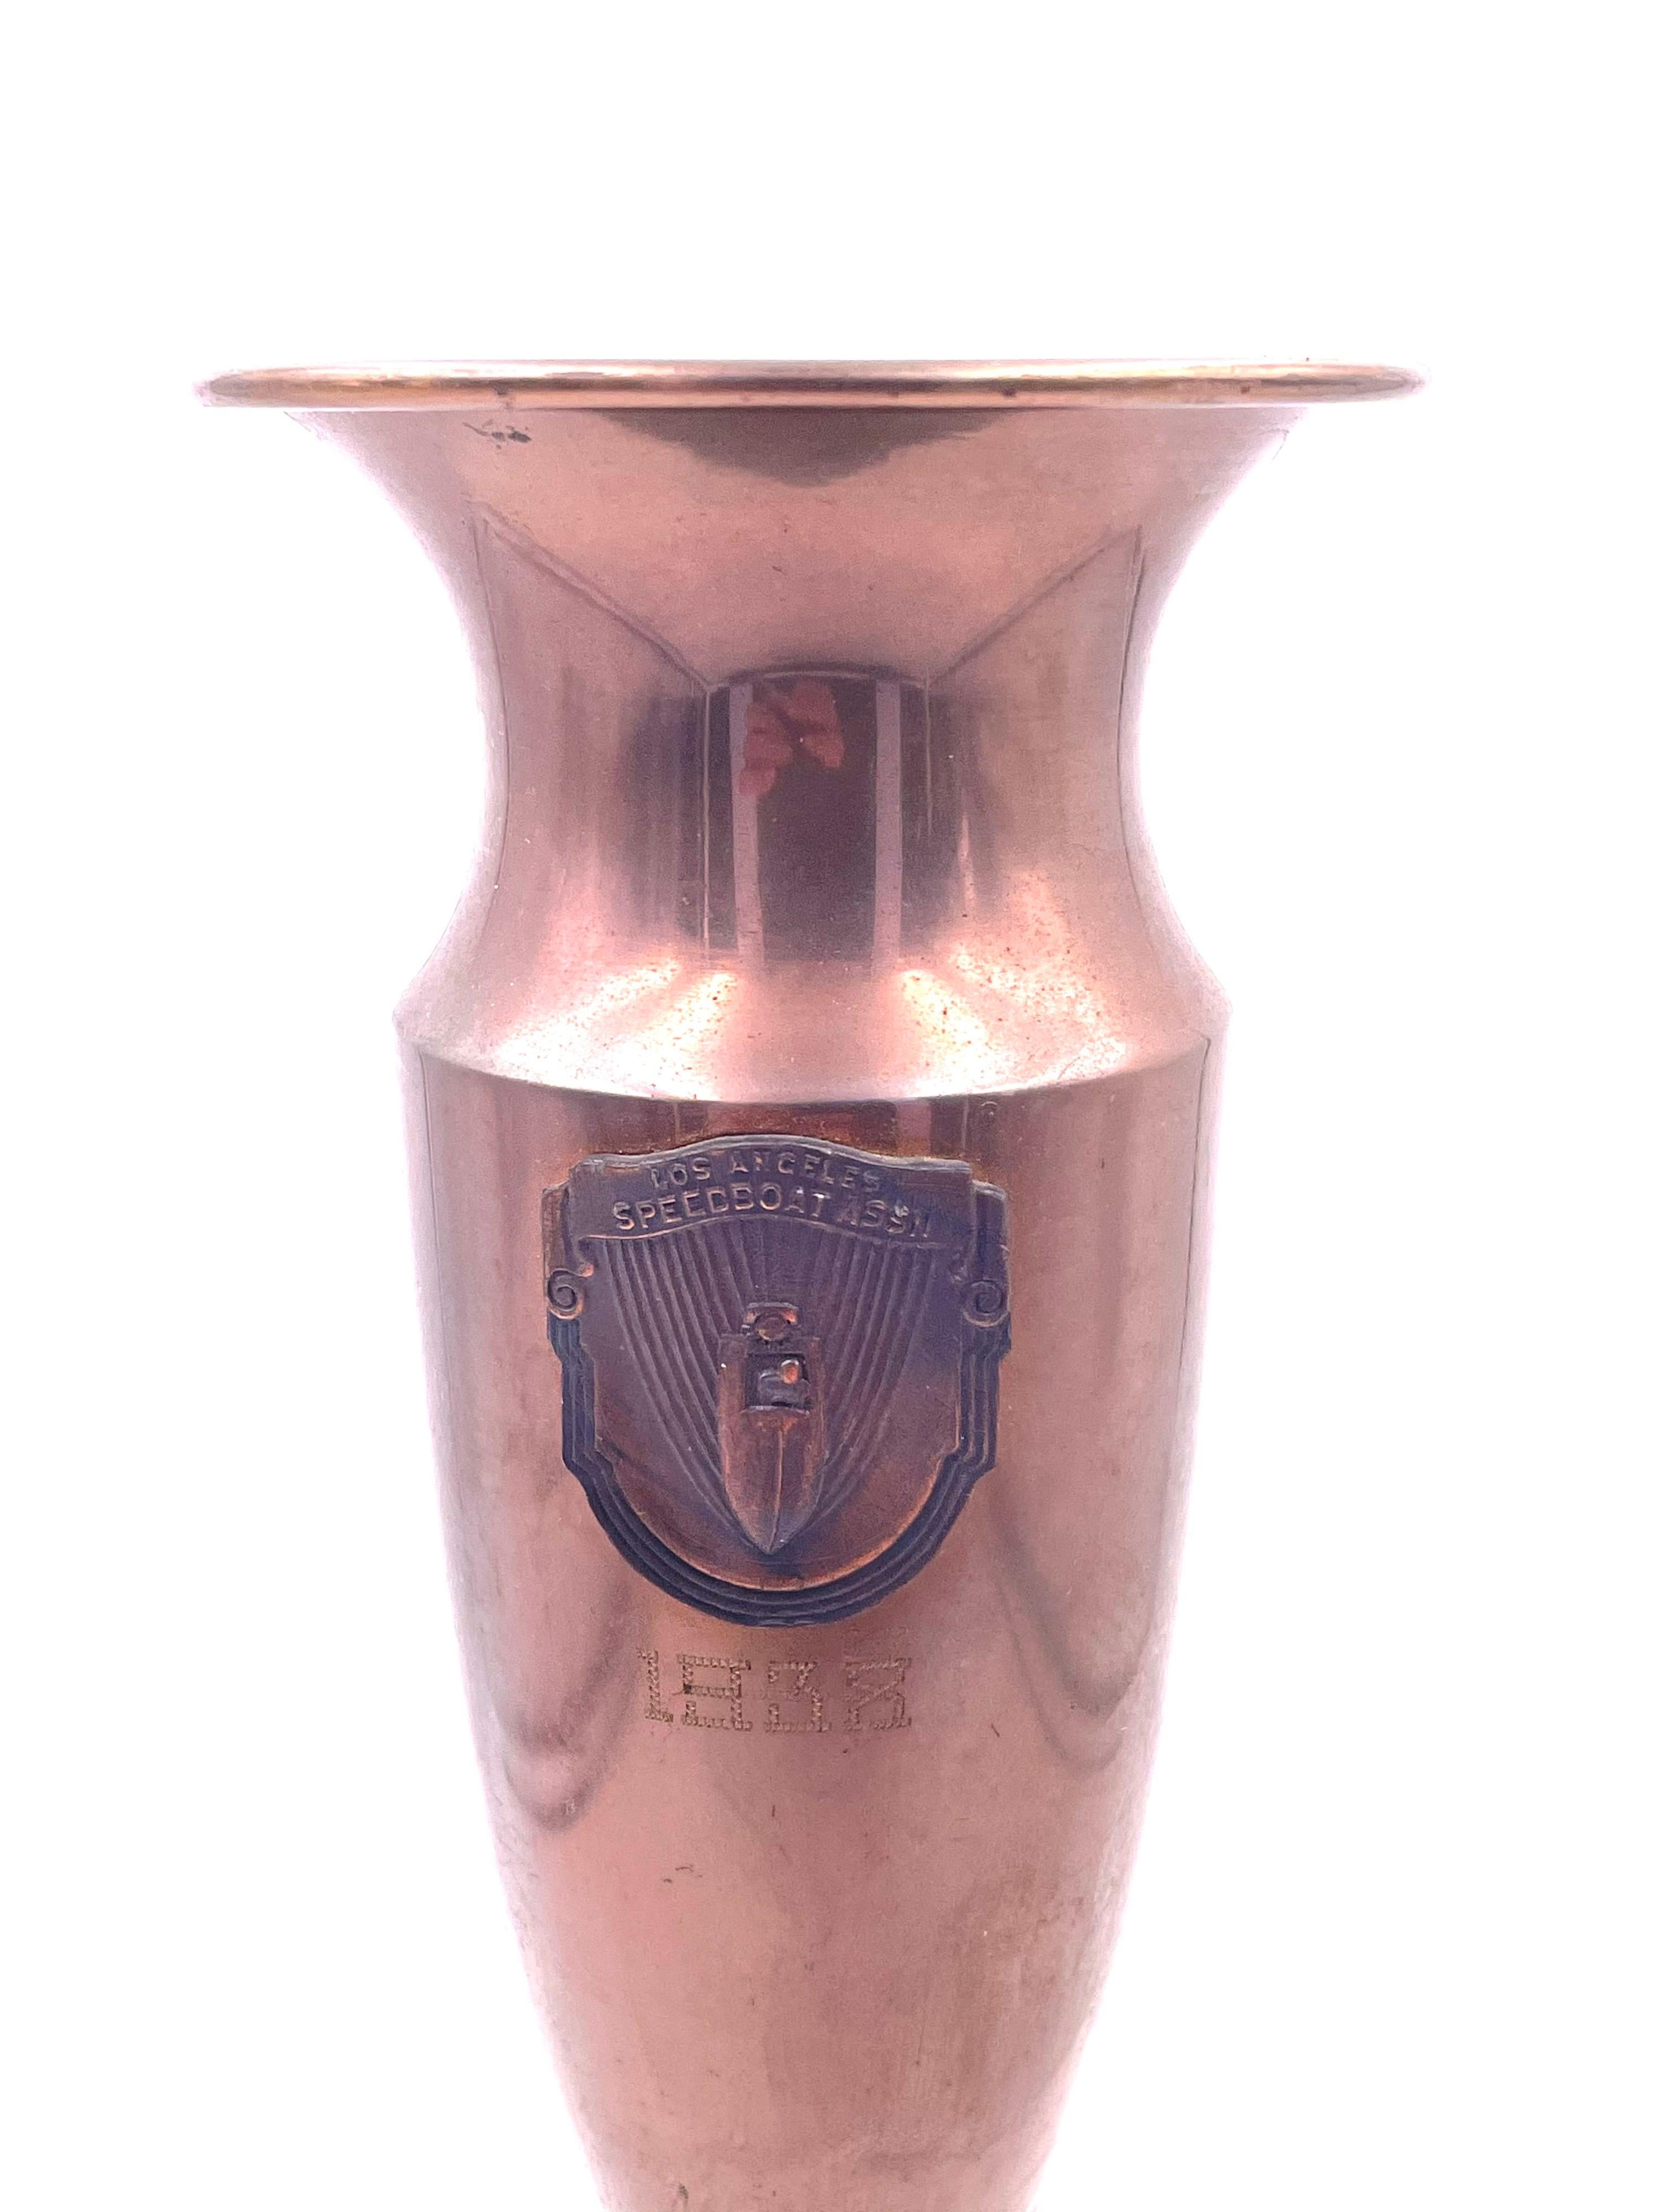 Solid Brass & Bakelite Trophy Cup Engraved Logo Los Angeles Speedboat Assn 1938 In Good Condition For Sale In San Diego, CA